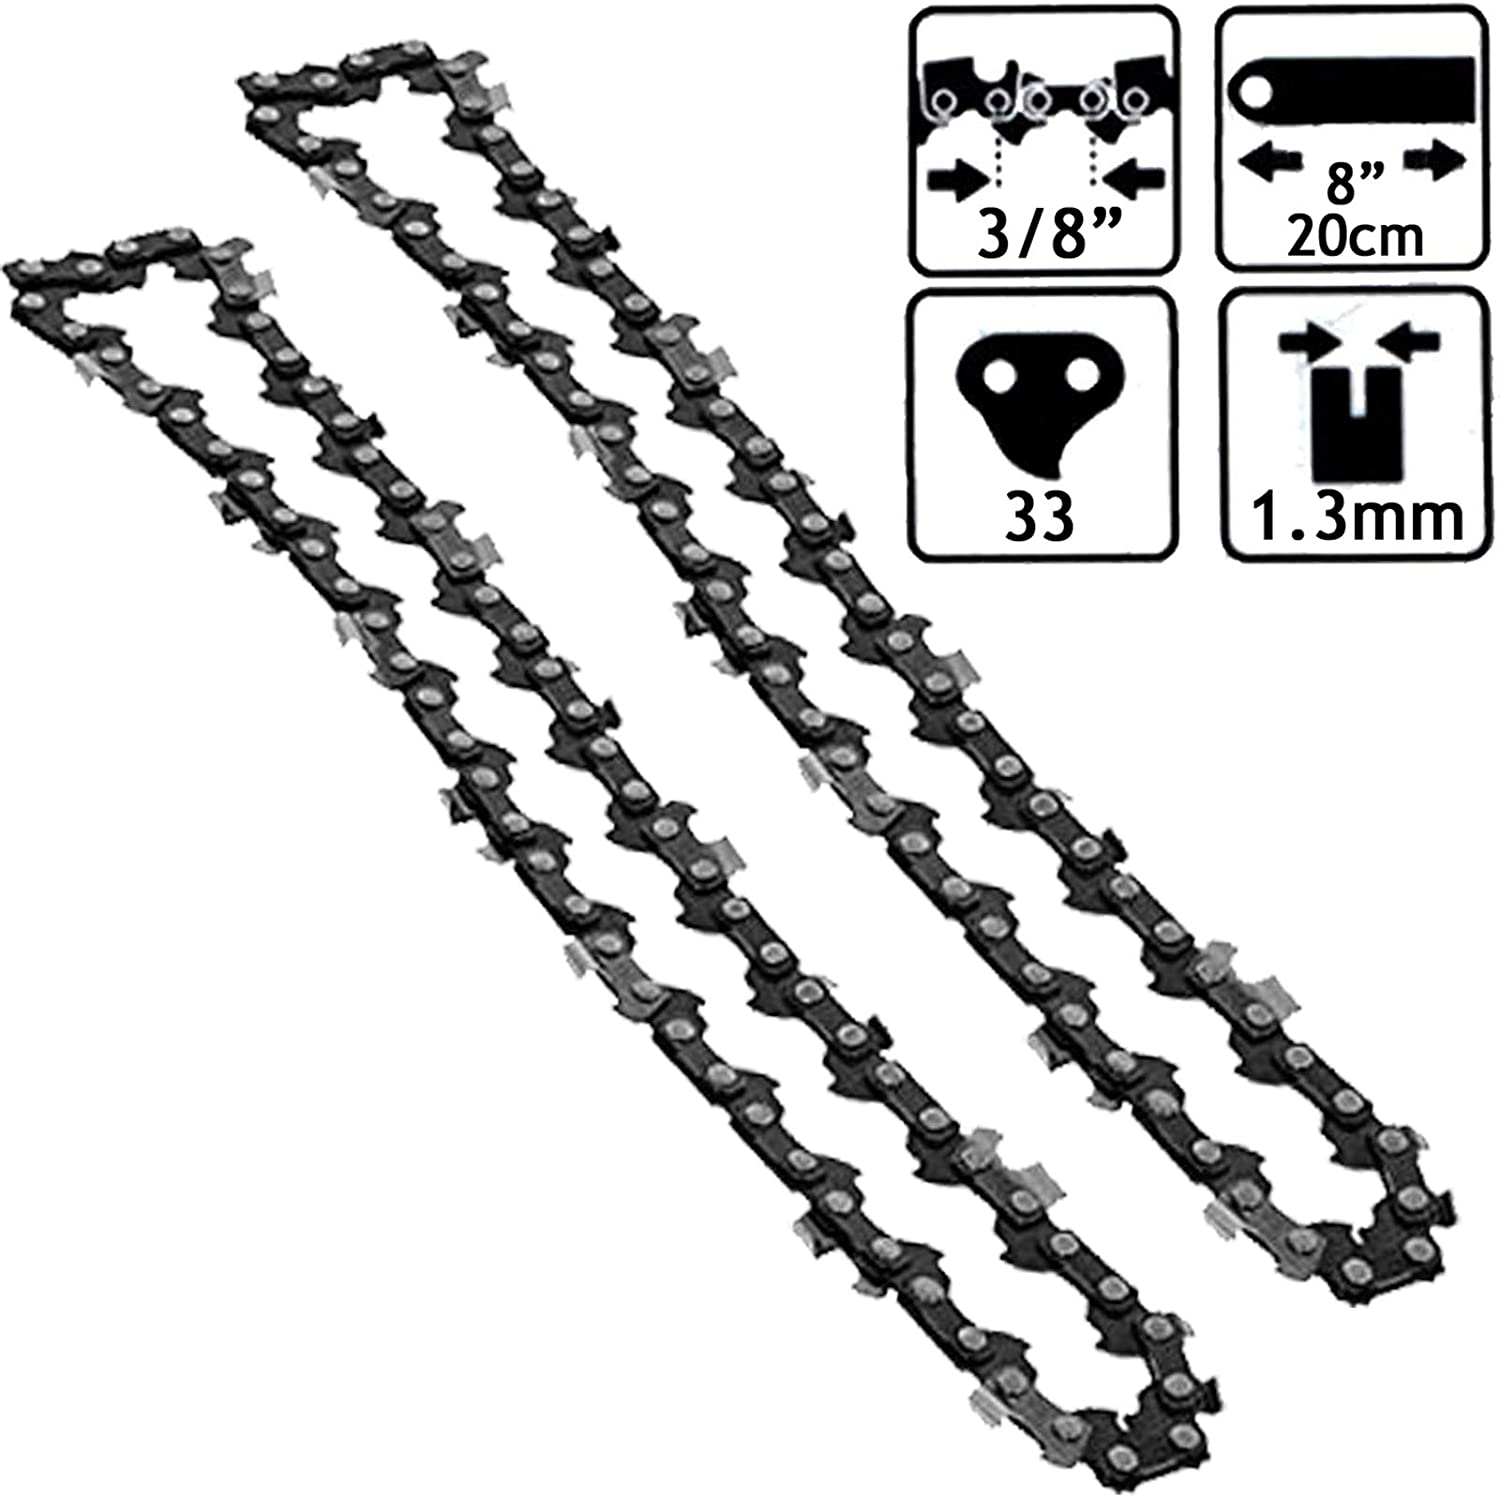 Saw Chain 33 Drive Link 8" 20cm Bar for QUALCAST YT4348 Chainsaw x 2